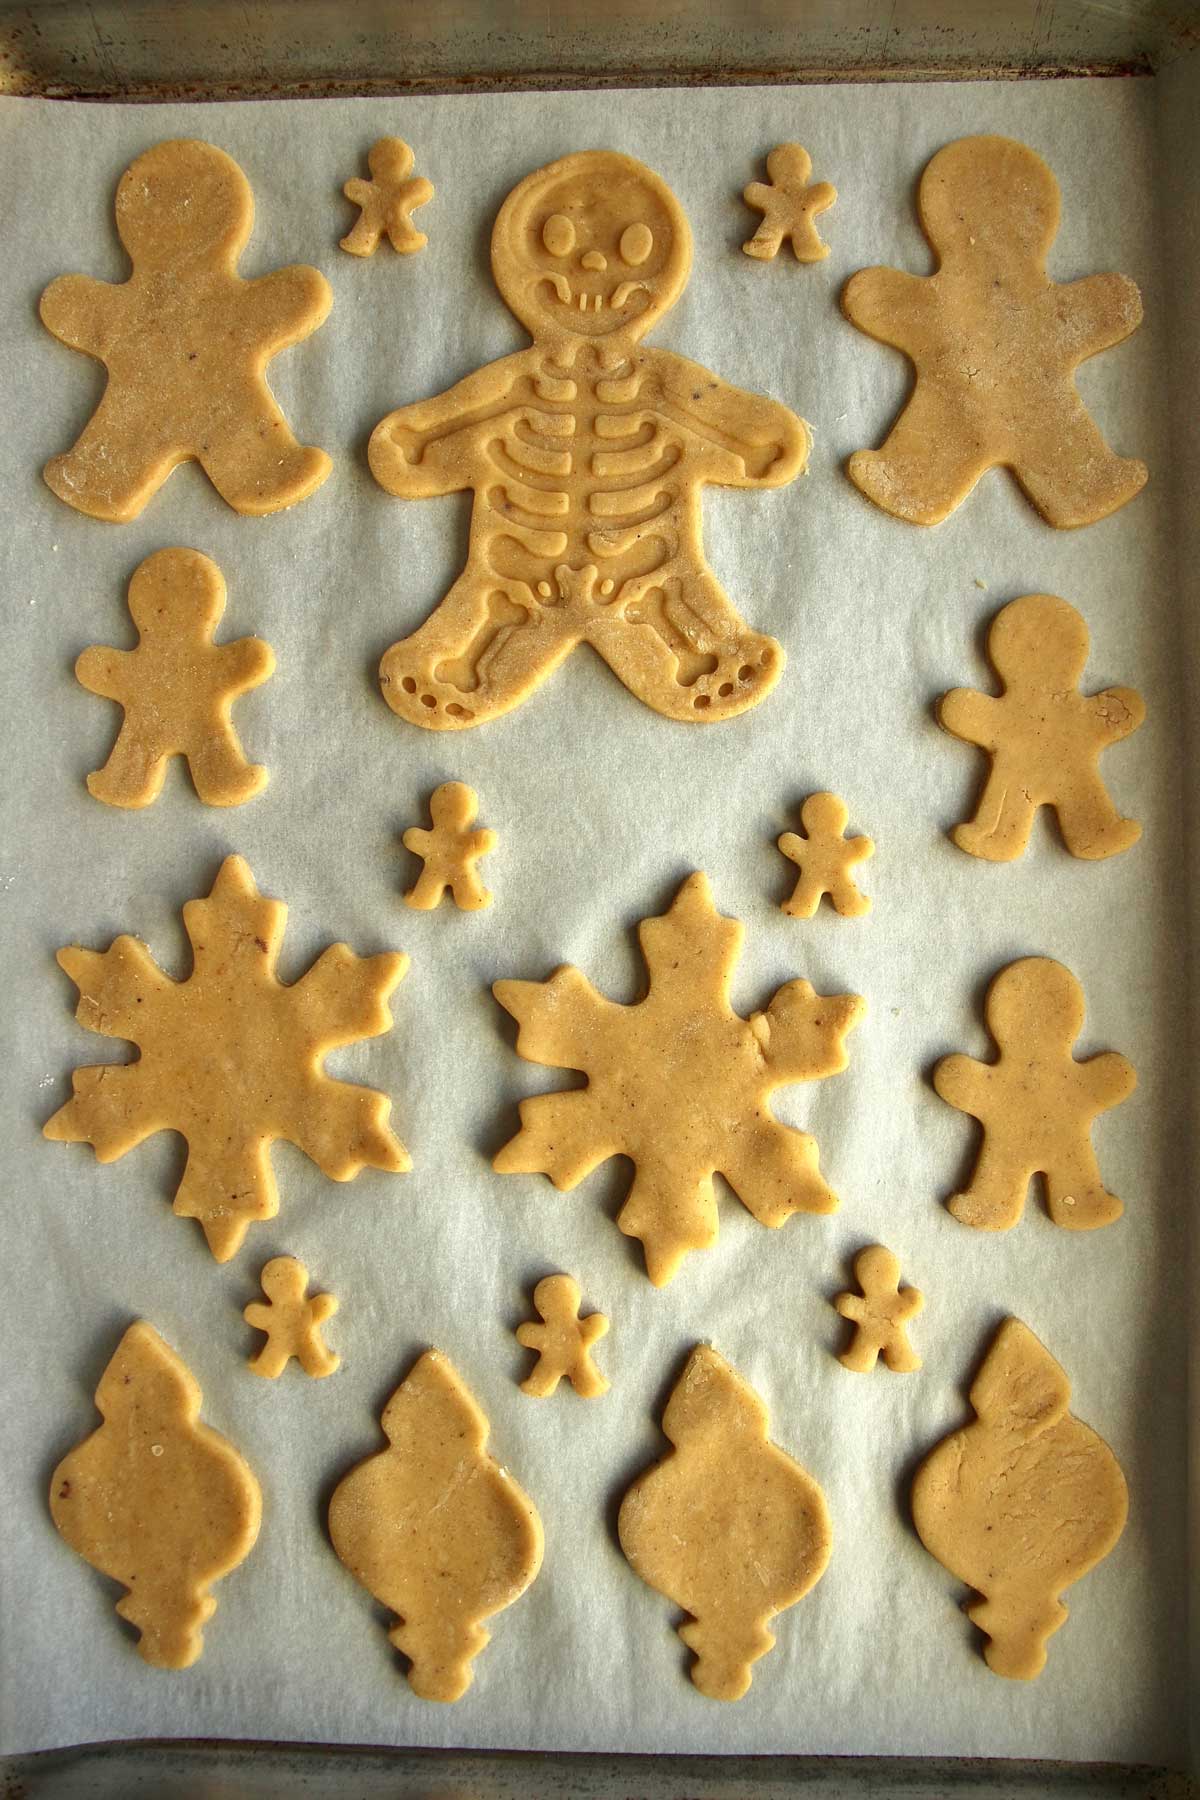 A baking sheet topped with unbaked Czech gingerbread cookies in various shapes.